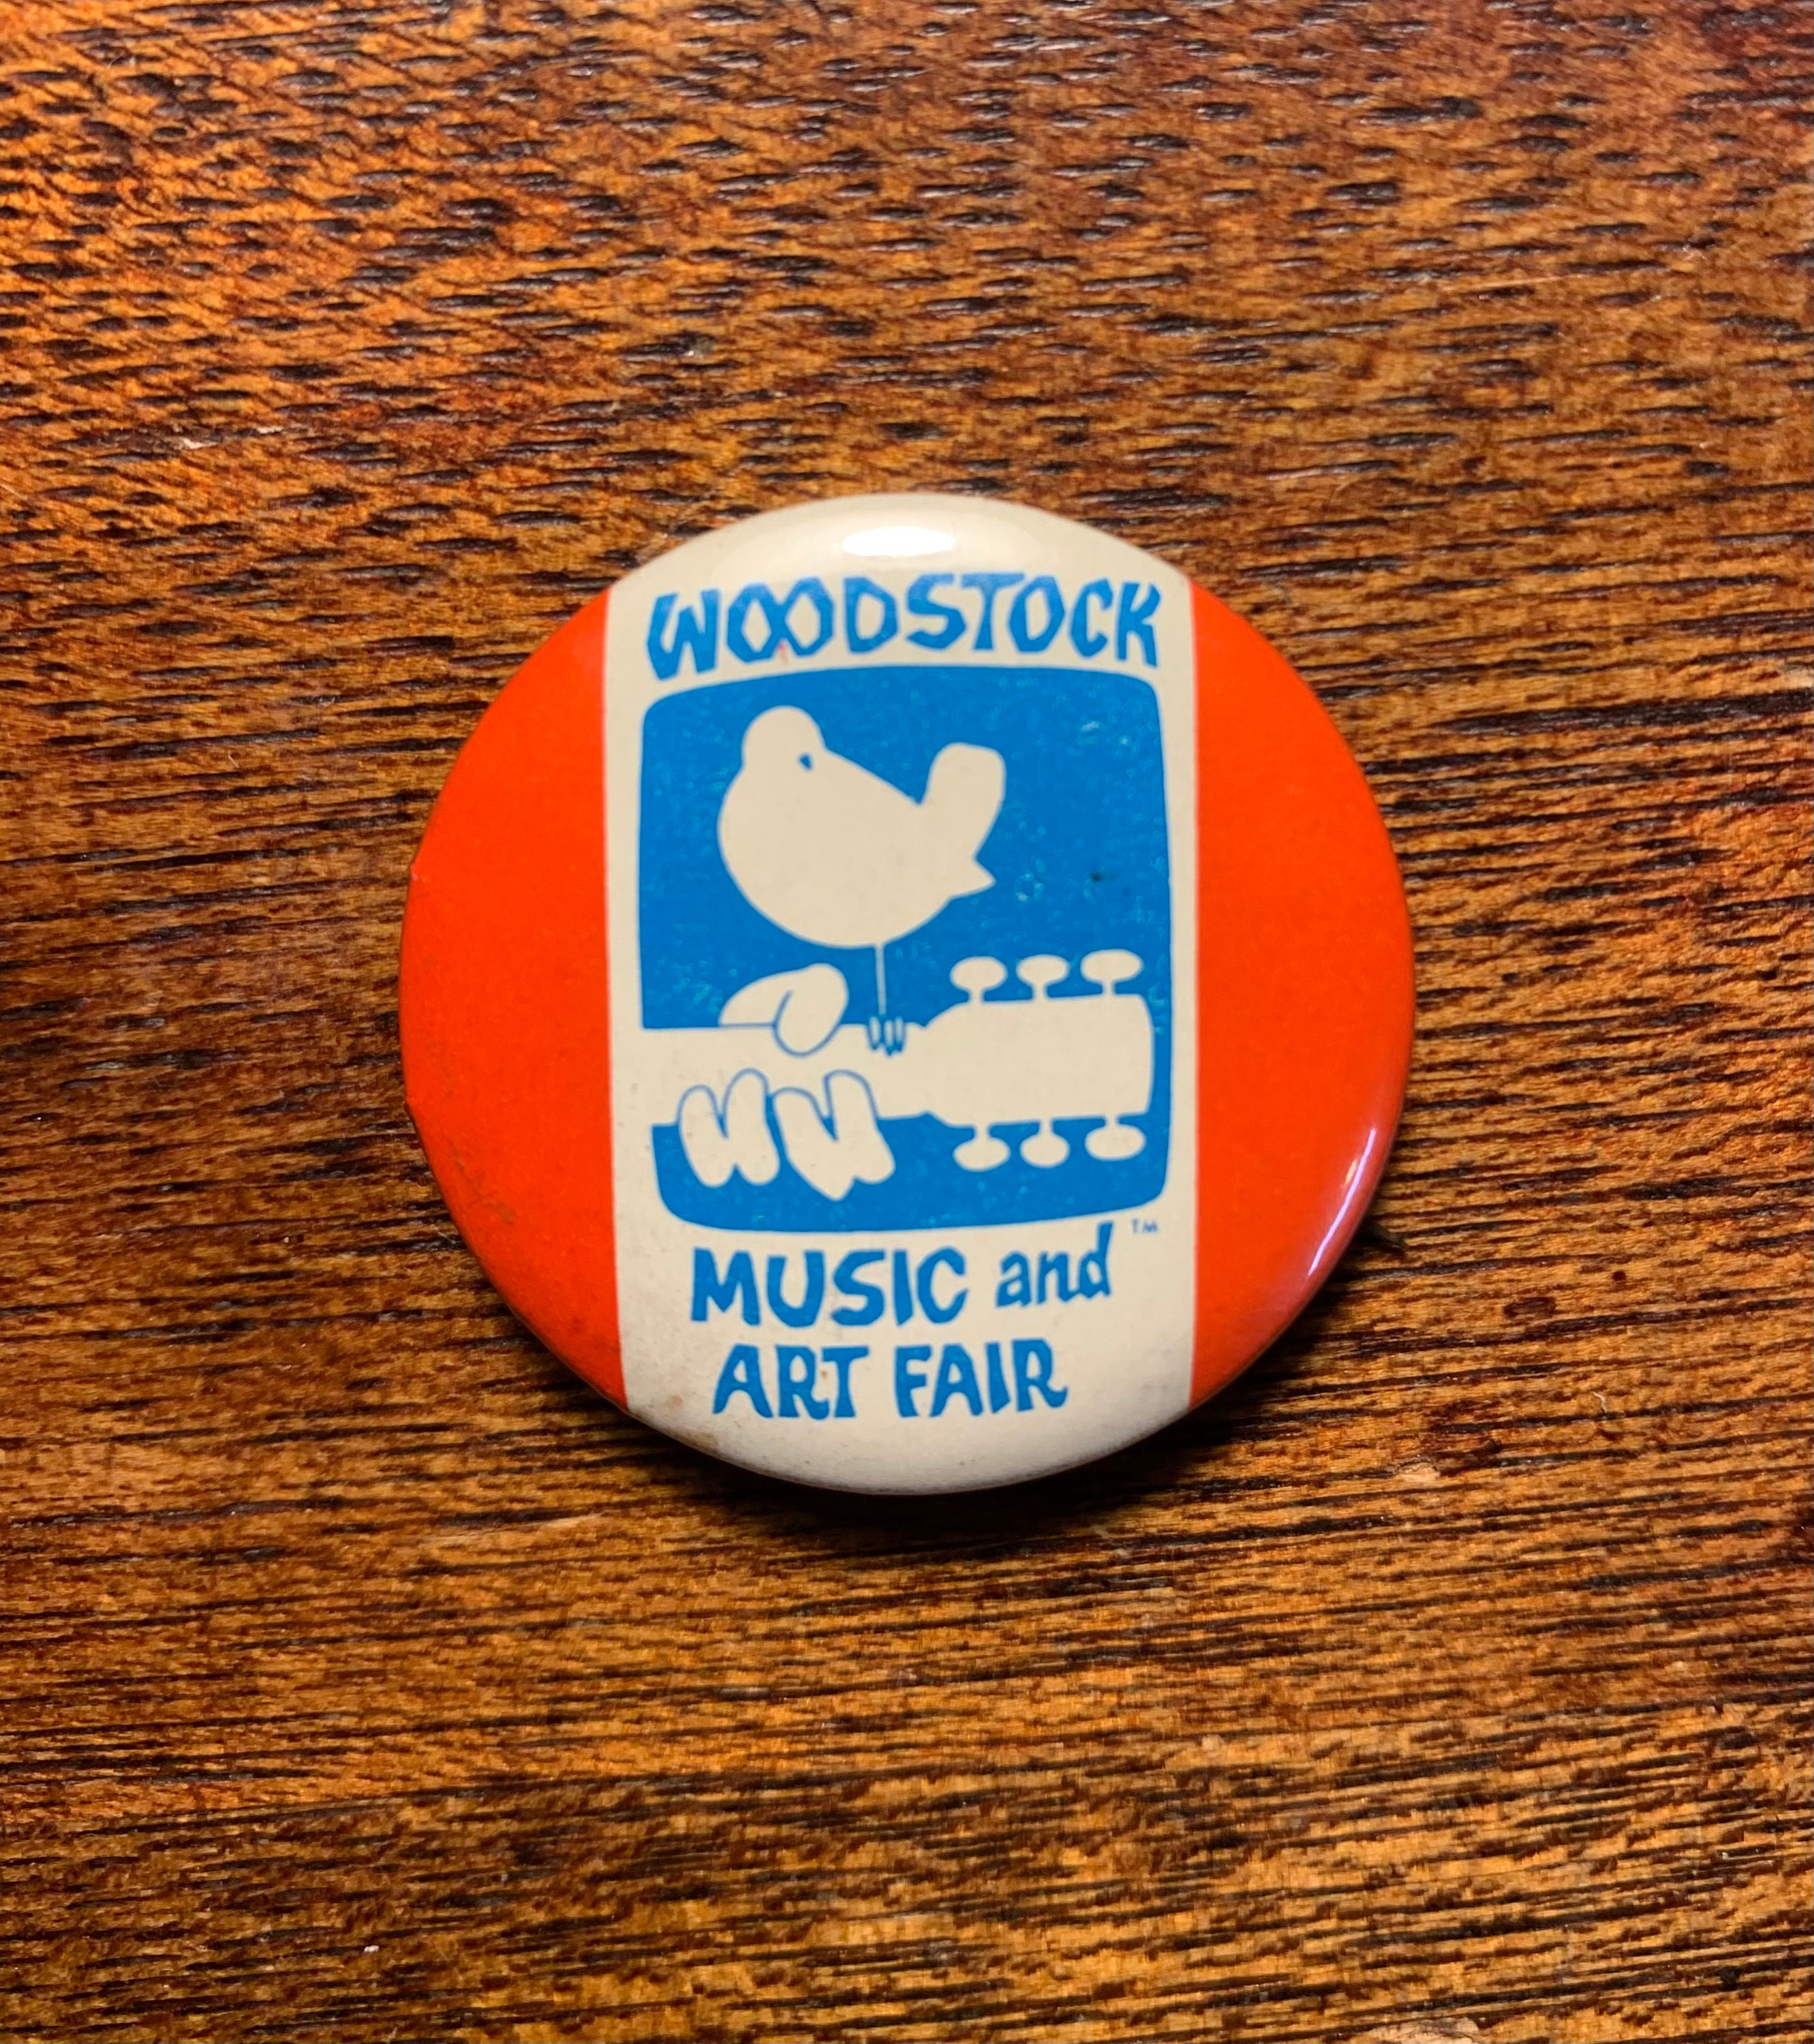 WOODSTOCK HIPPIES 7 pins 1" buttons badges new Pinbacks*** 